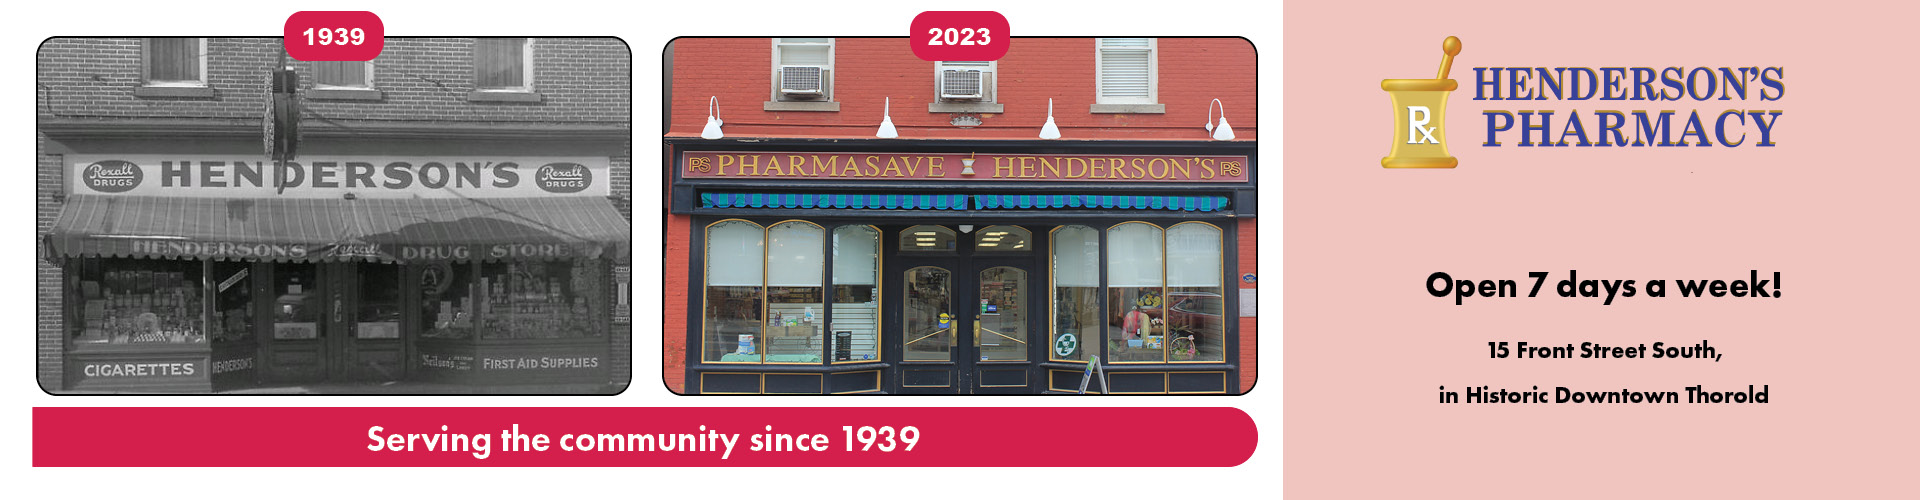 Henderson's Pharmacy, serving the community since 1939